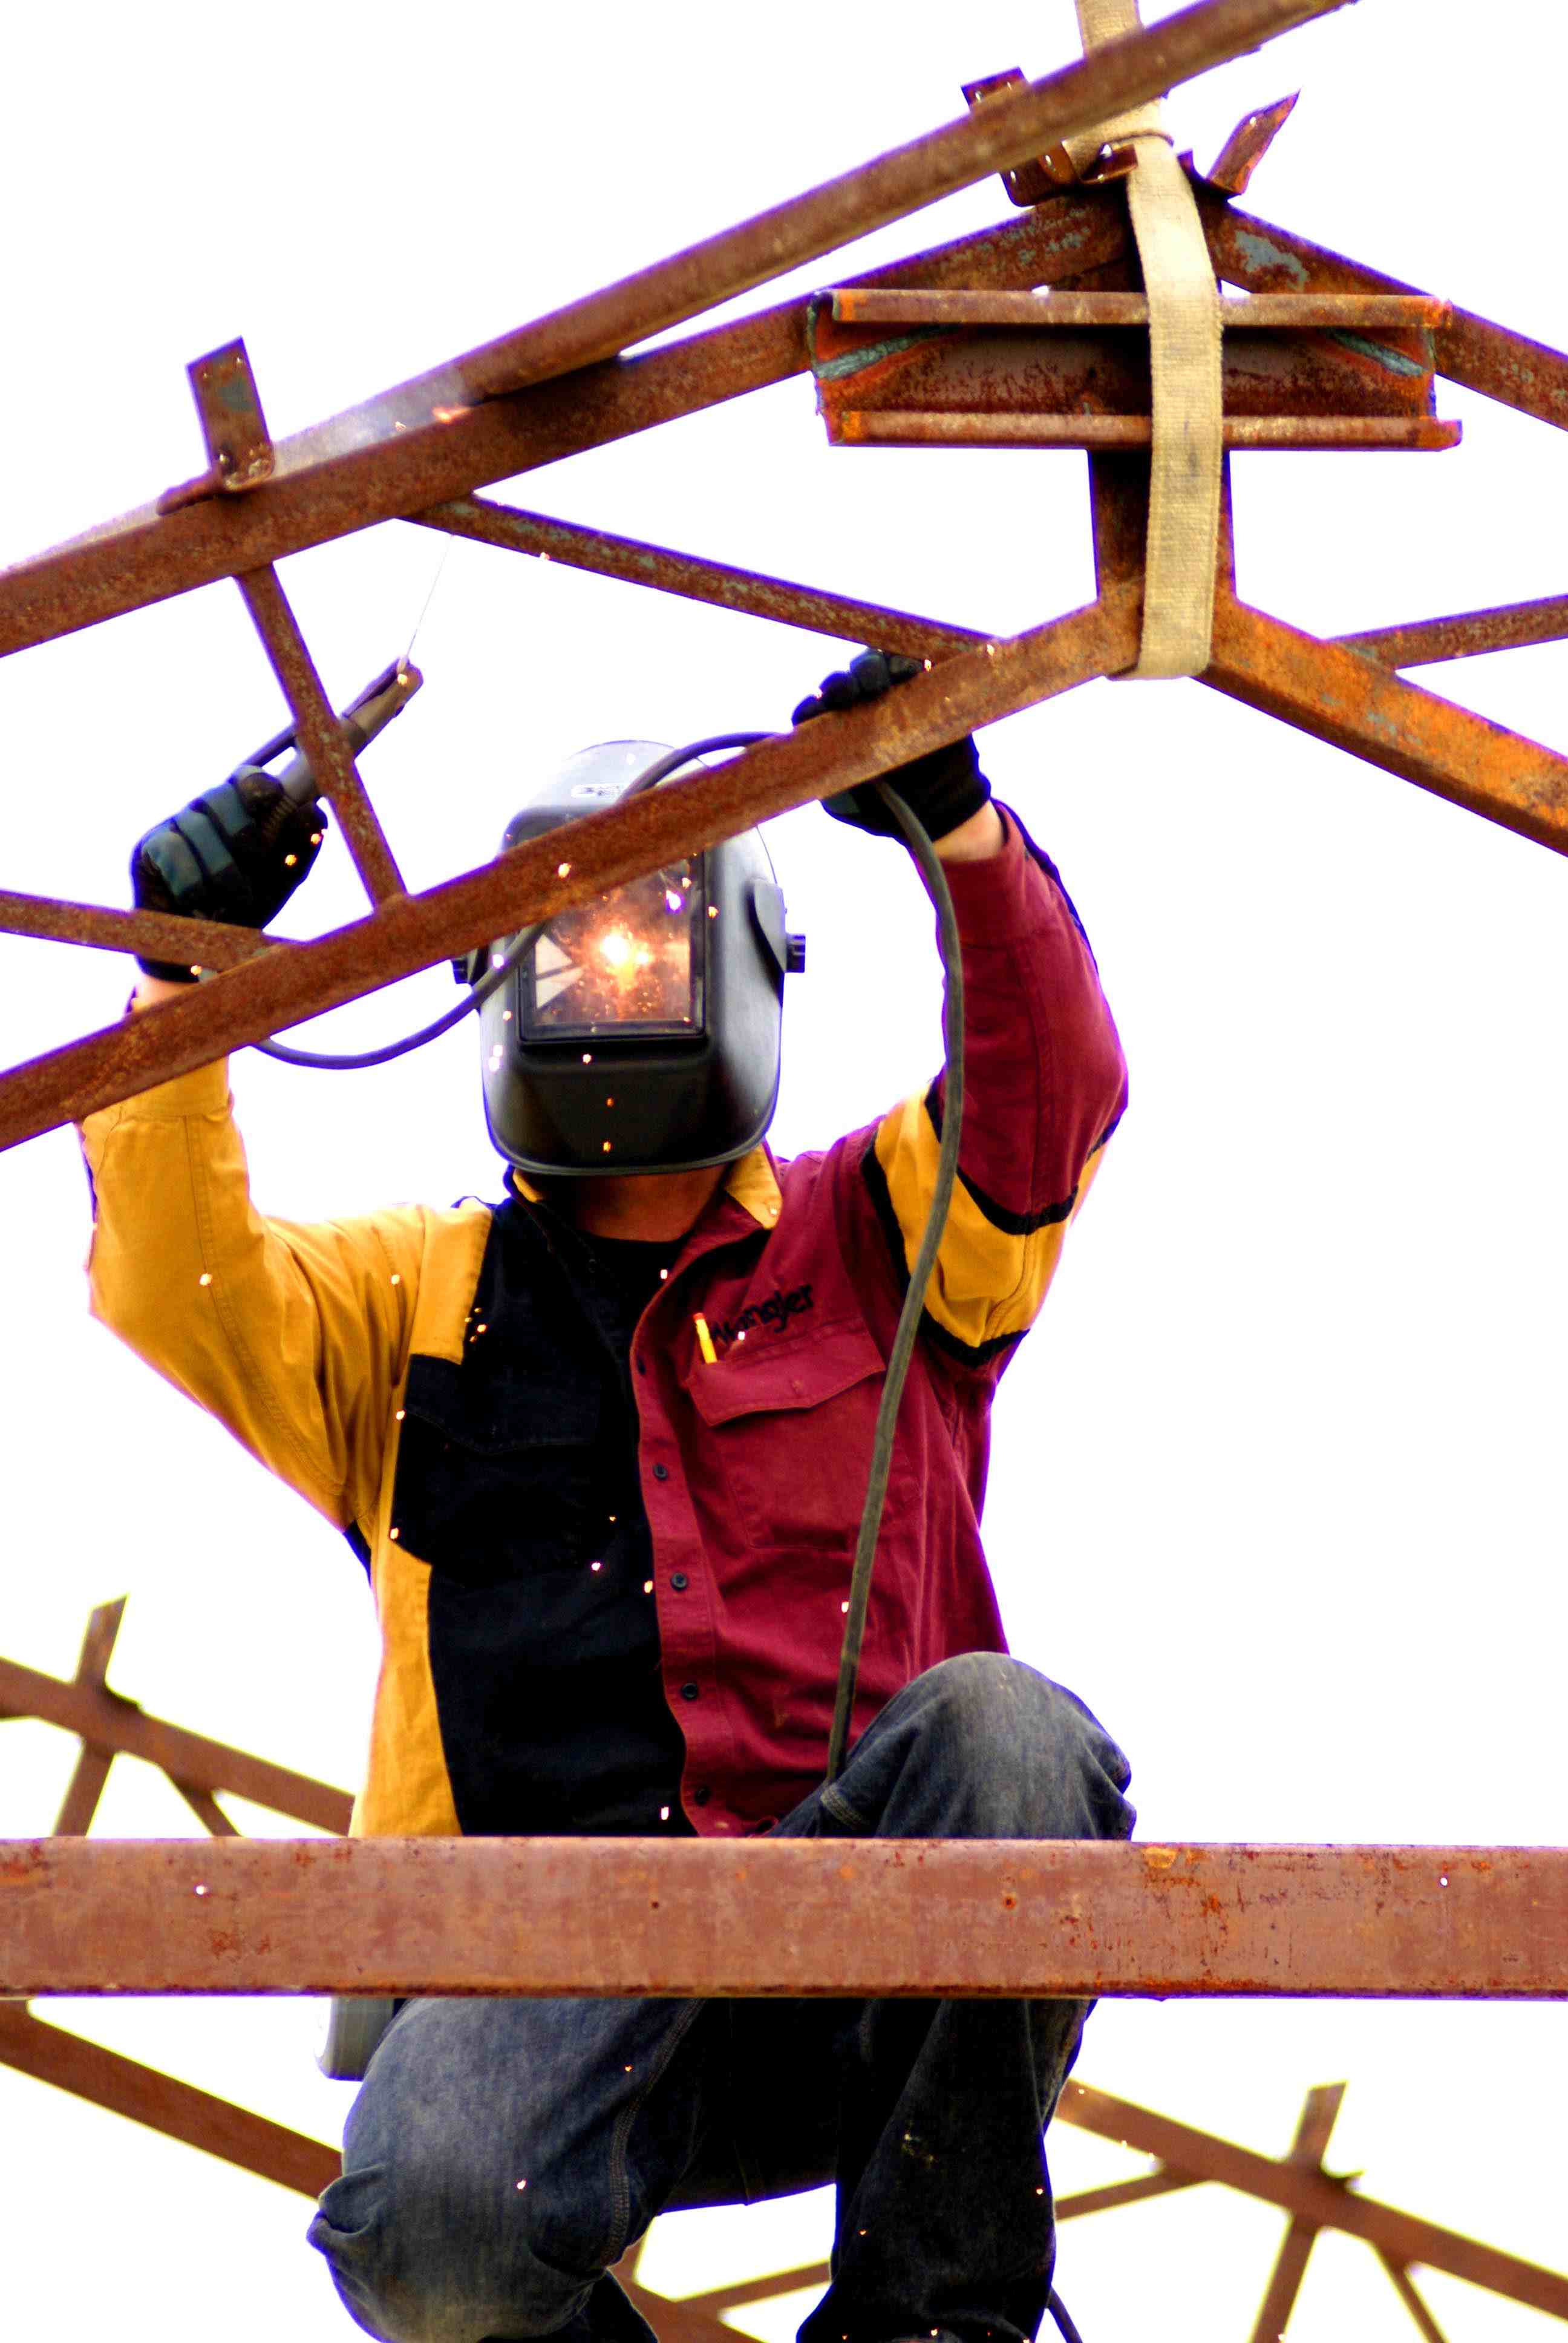 Construction sites pose many serious risks to those working at and around them.